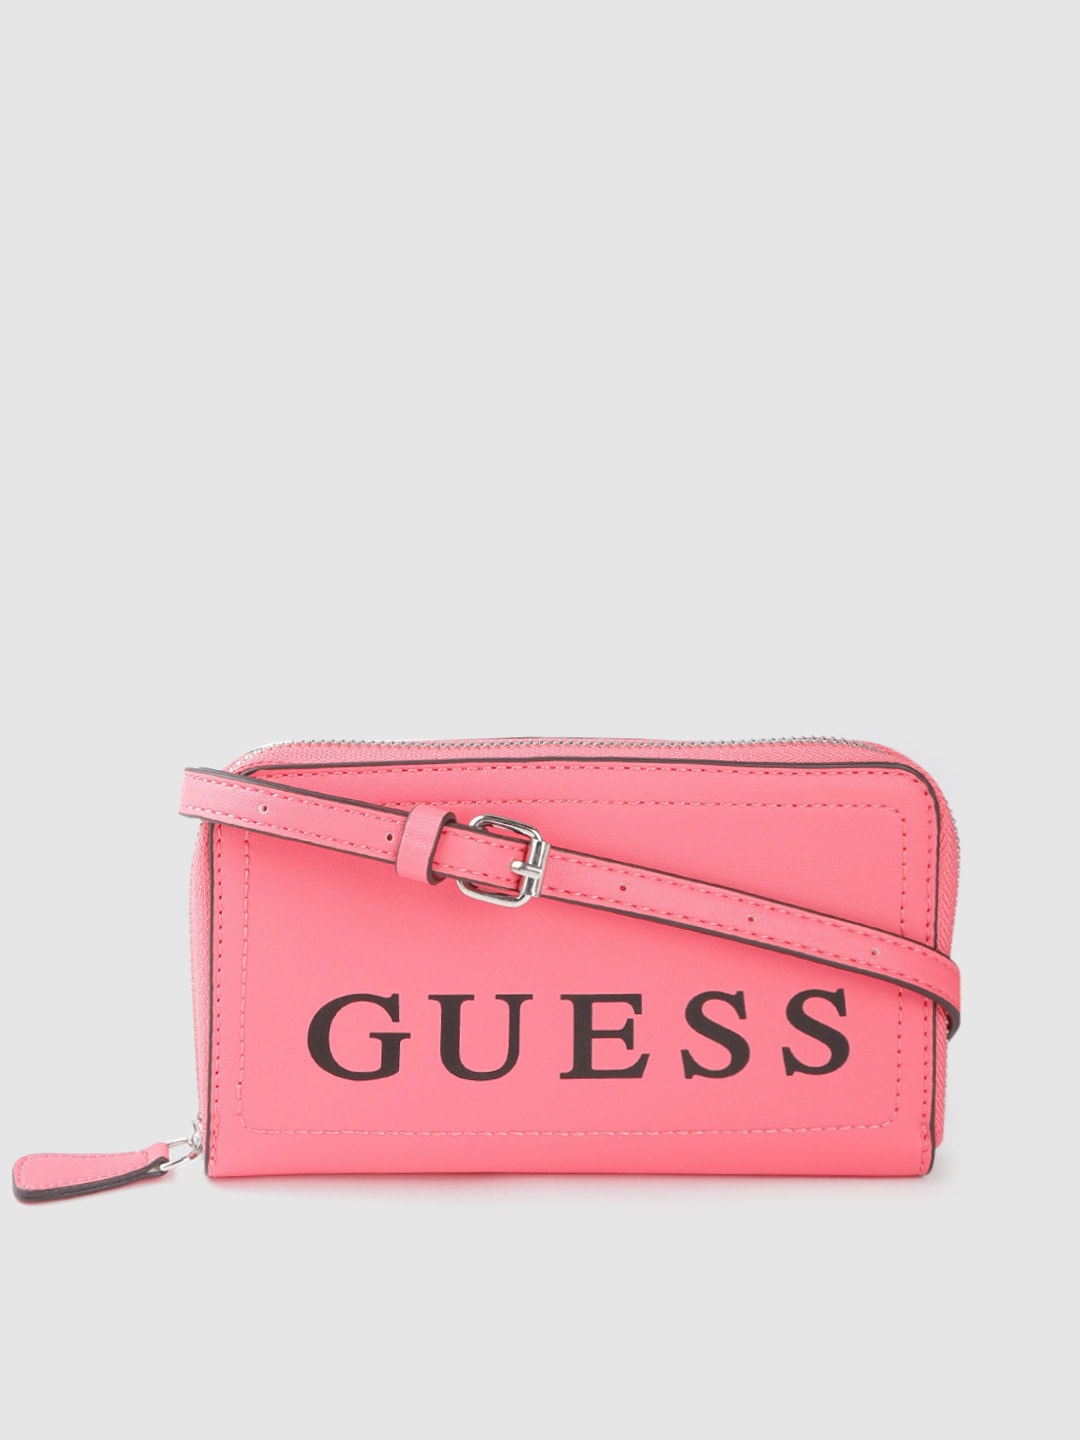 GUESS Pink & Black Brand Logo Printed Zip Around Wallet with Detachable Sling Strap Price in India